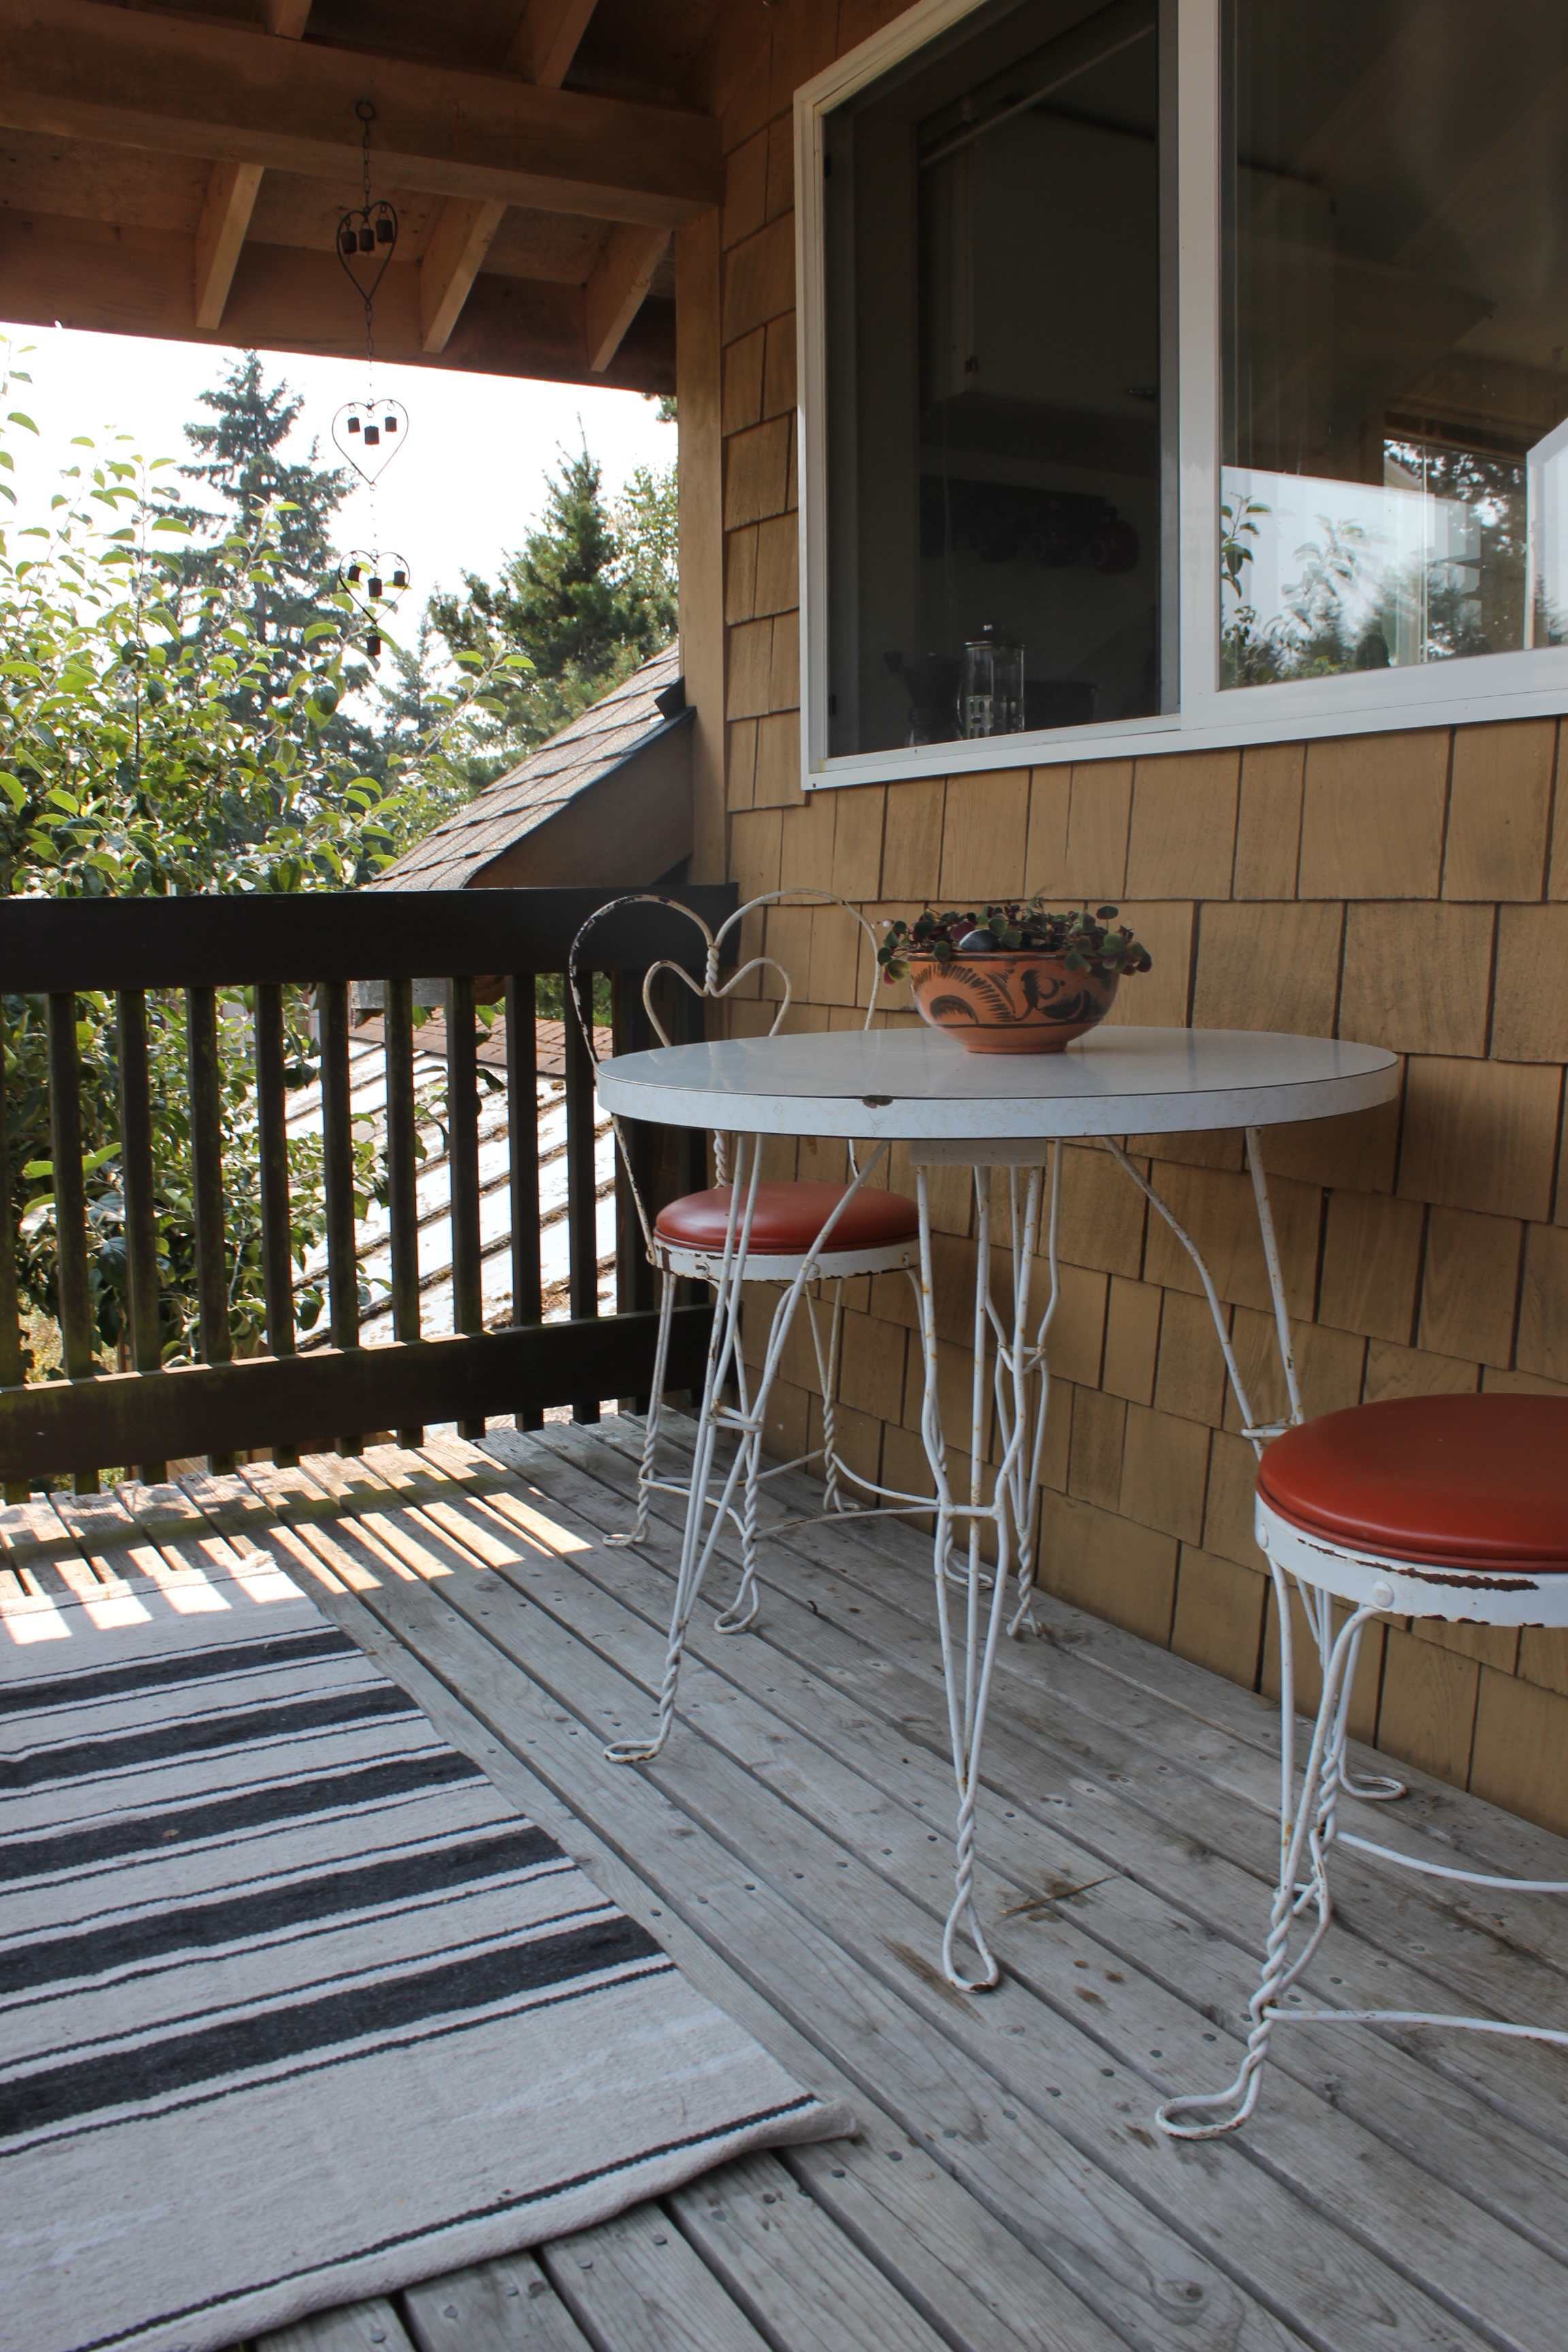 plum nelli apartment porch with vintage chairs plants and handwoven rug.JPG